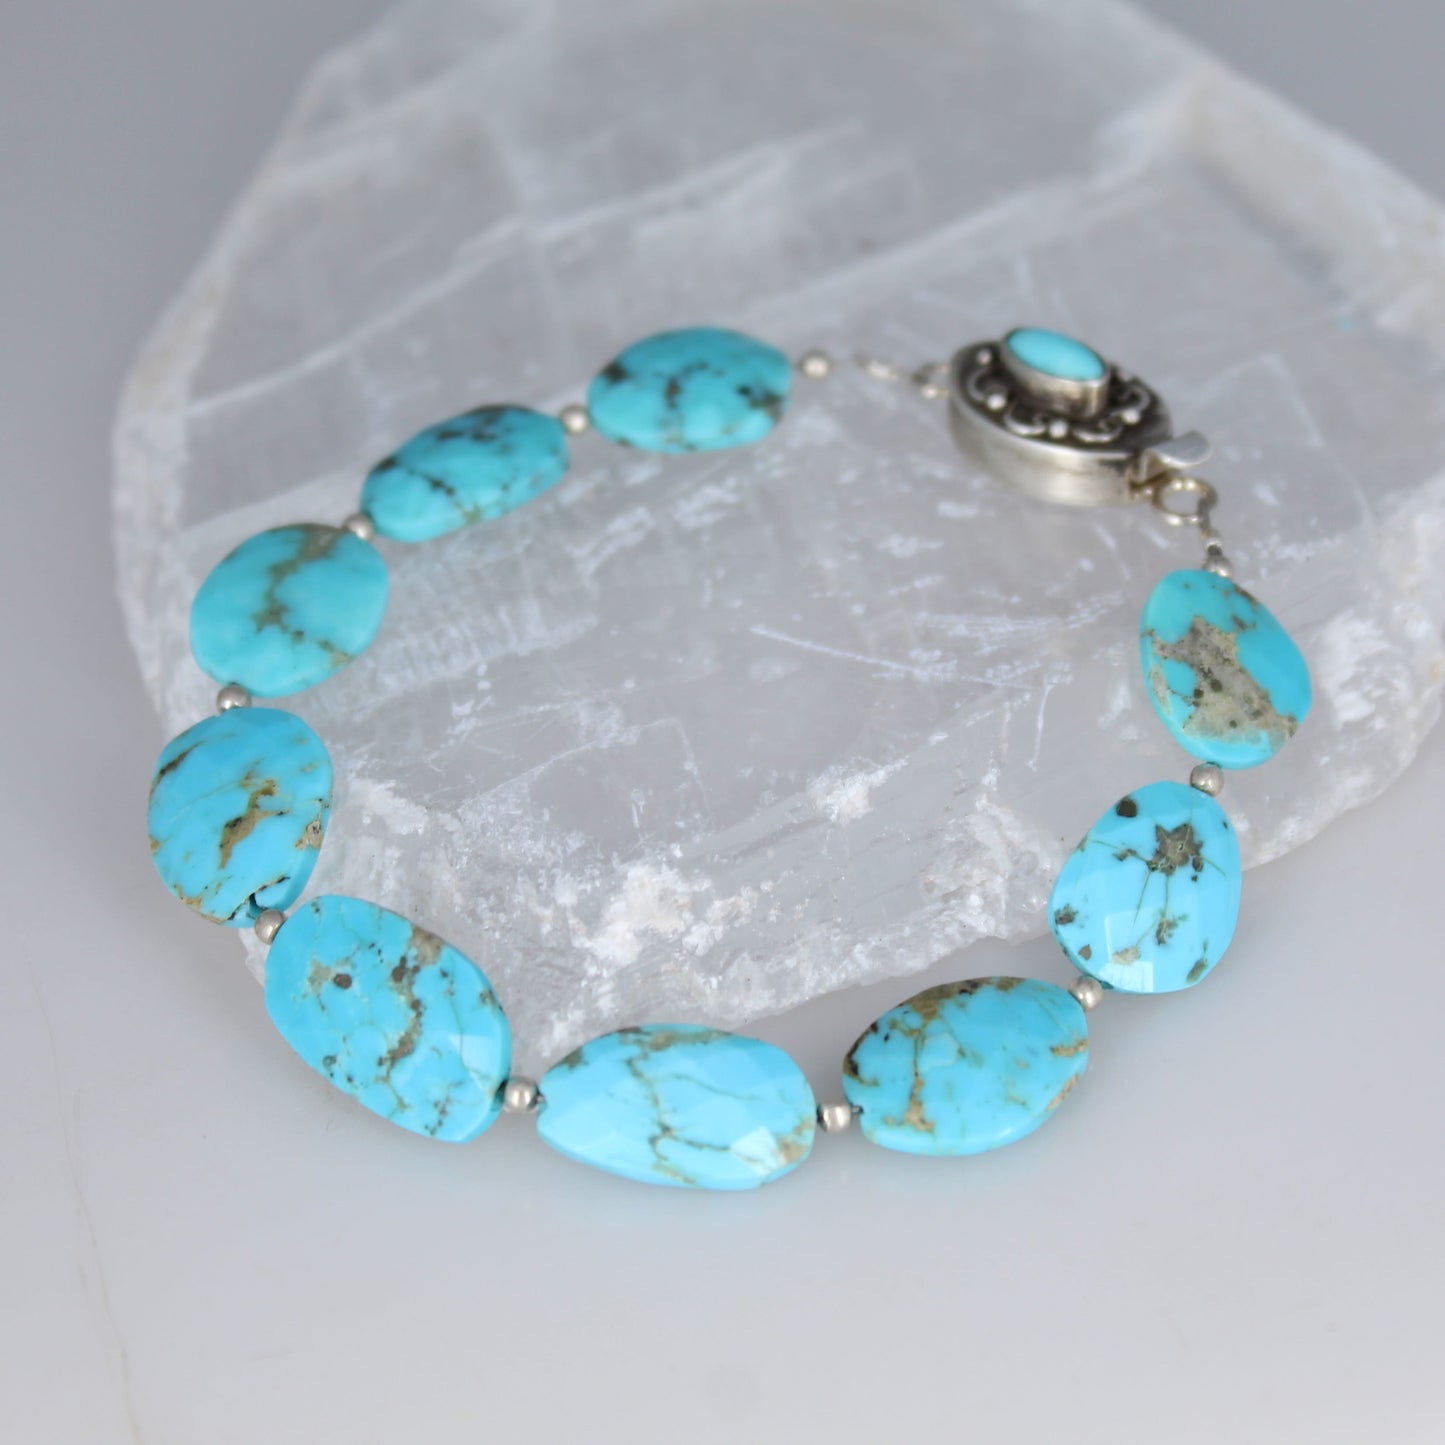 Faceted Sleeping Beauty Turquoise Bracelet Matching Clasp